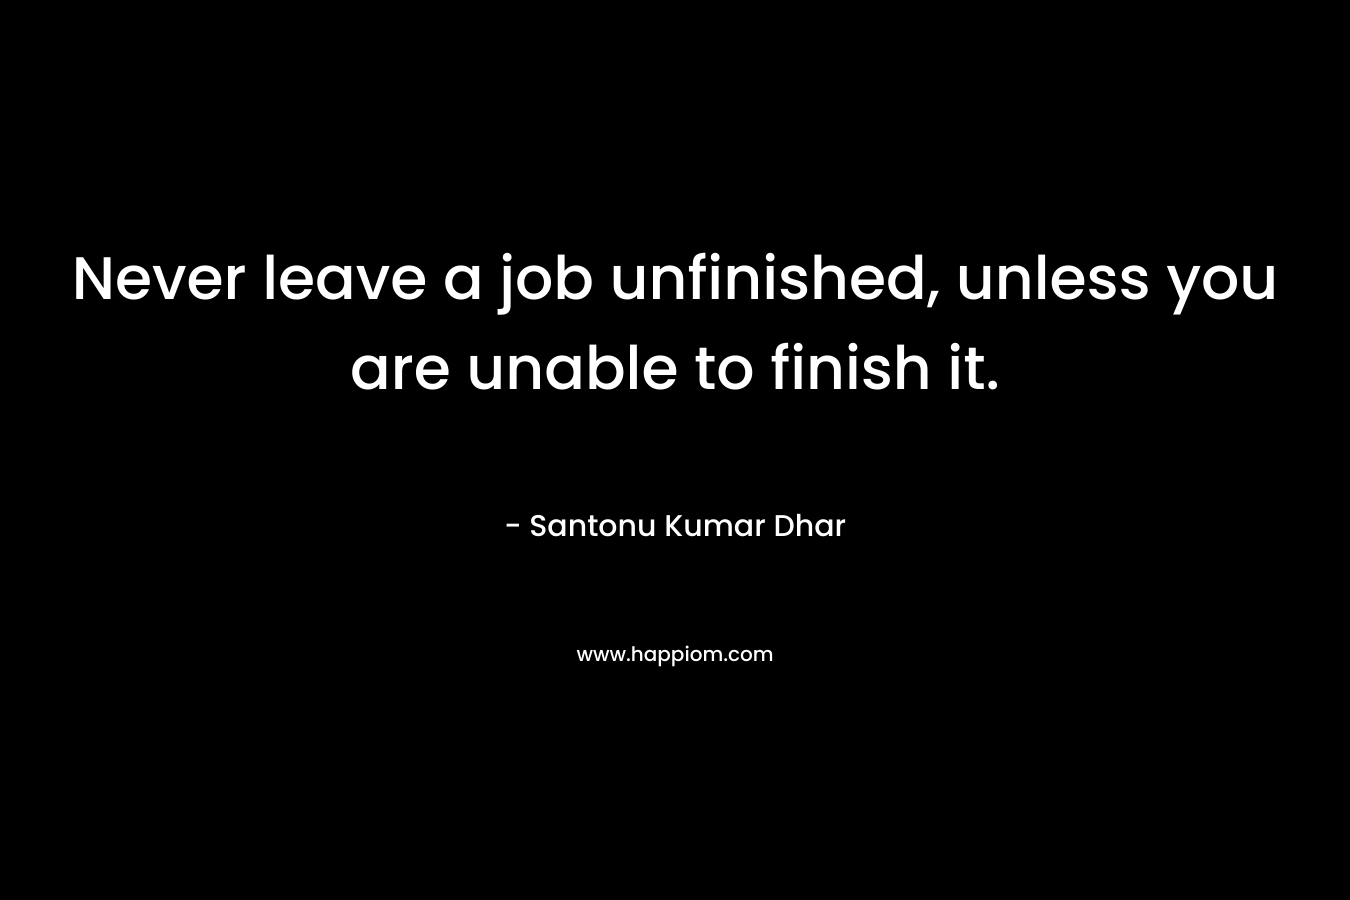 Never leave a job unfinished, unless you are unable to finish it.